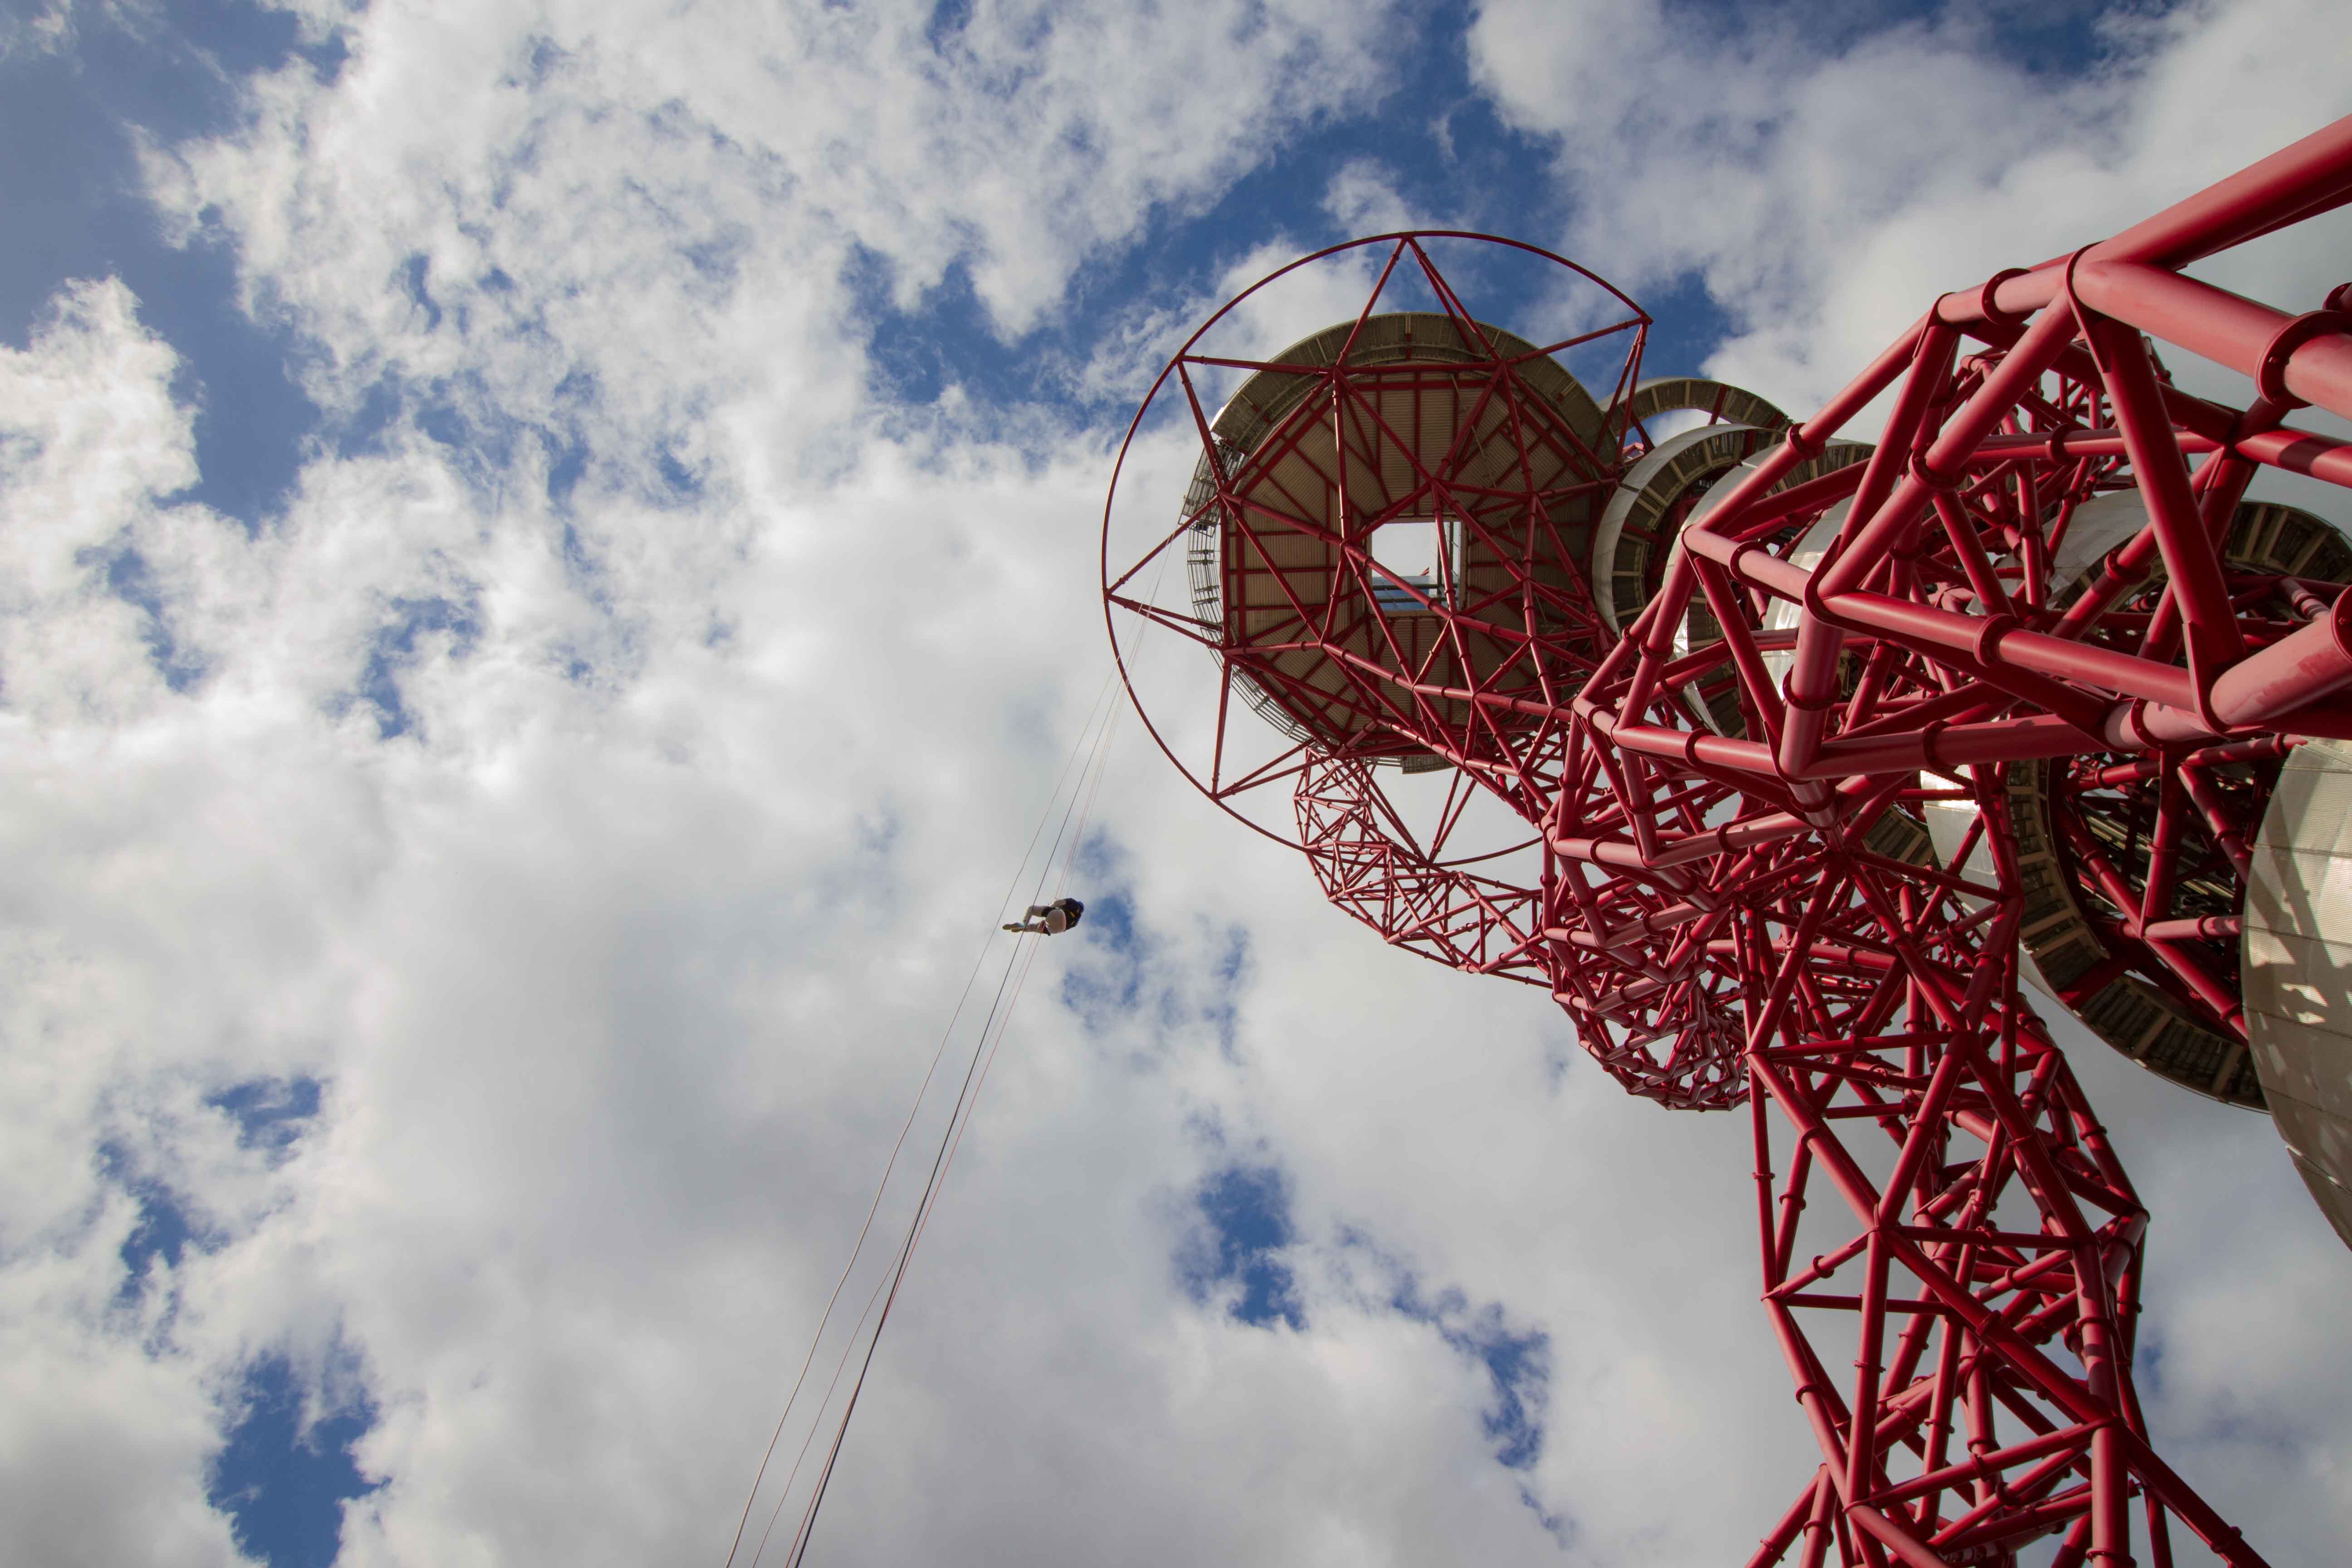 Our 80m Abseil at The ArcelorMittal Orbit